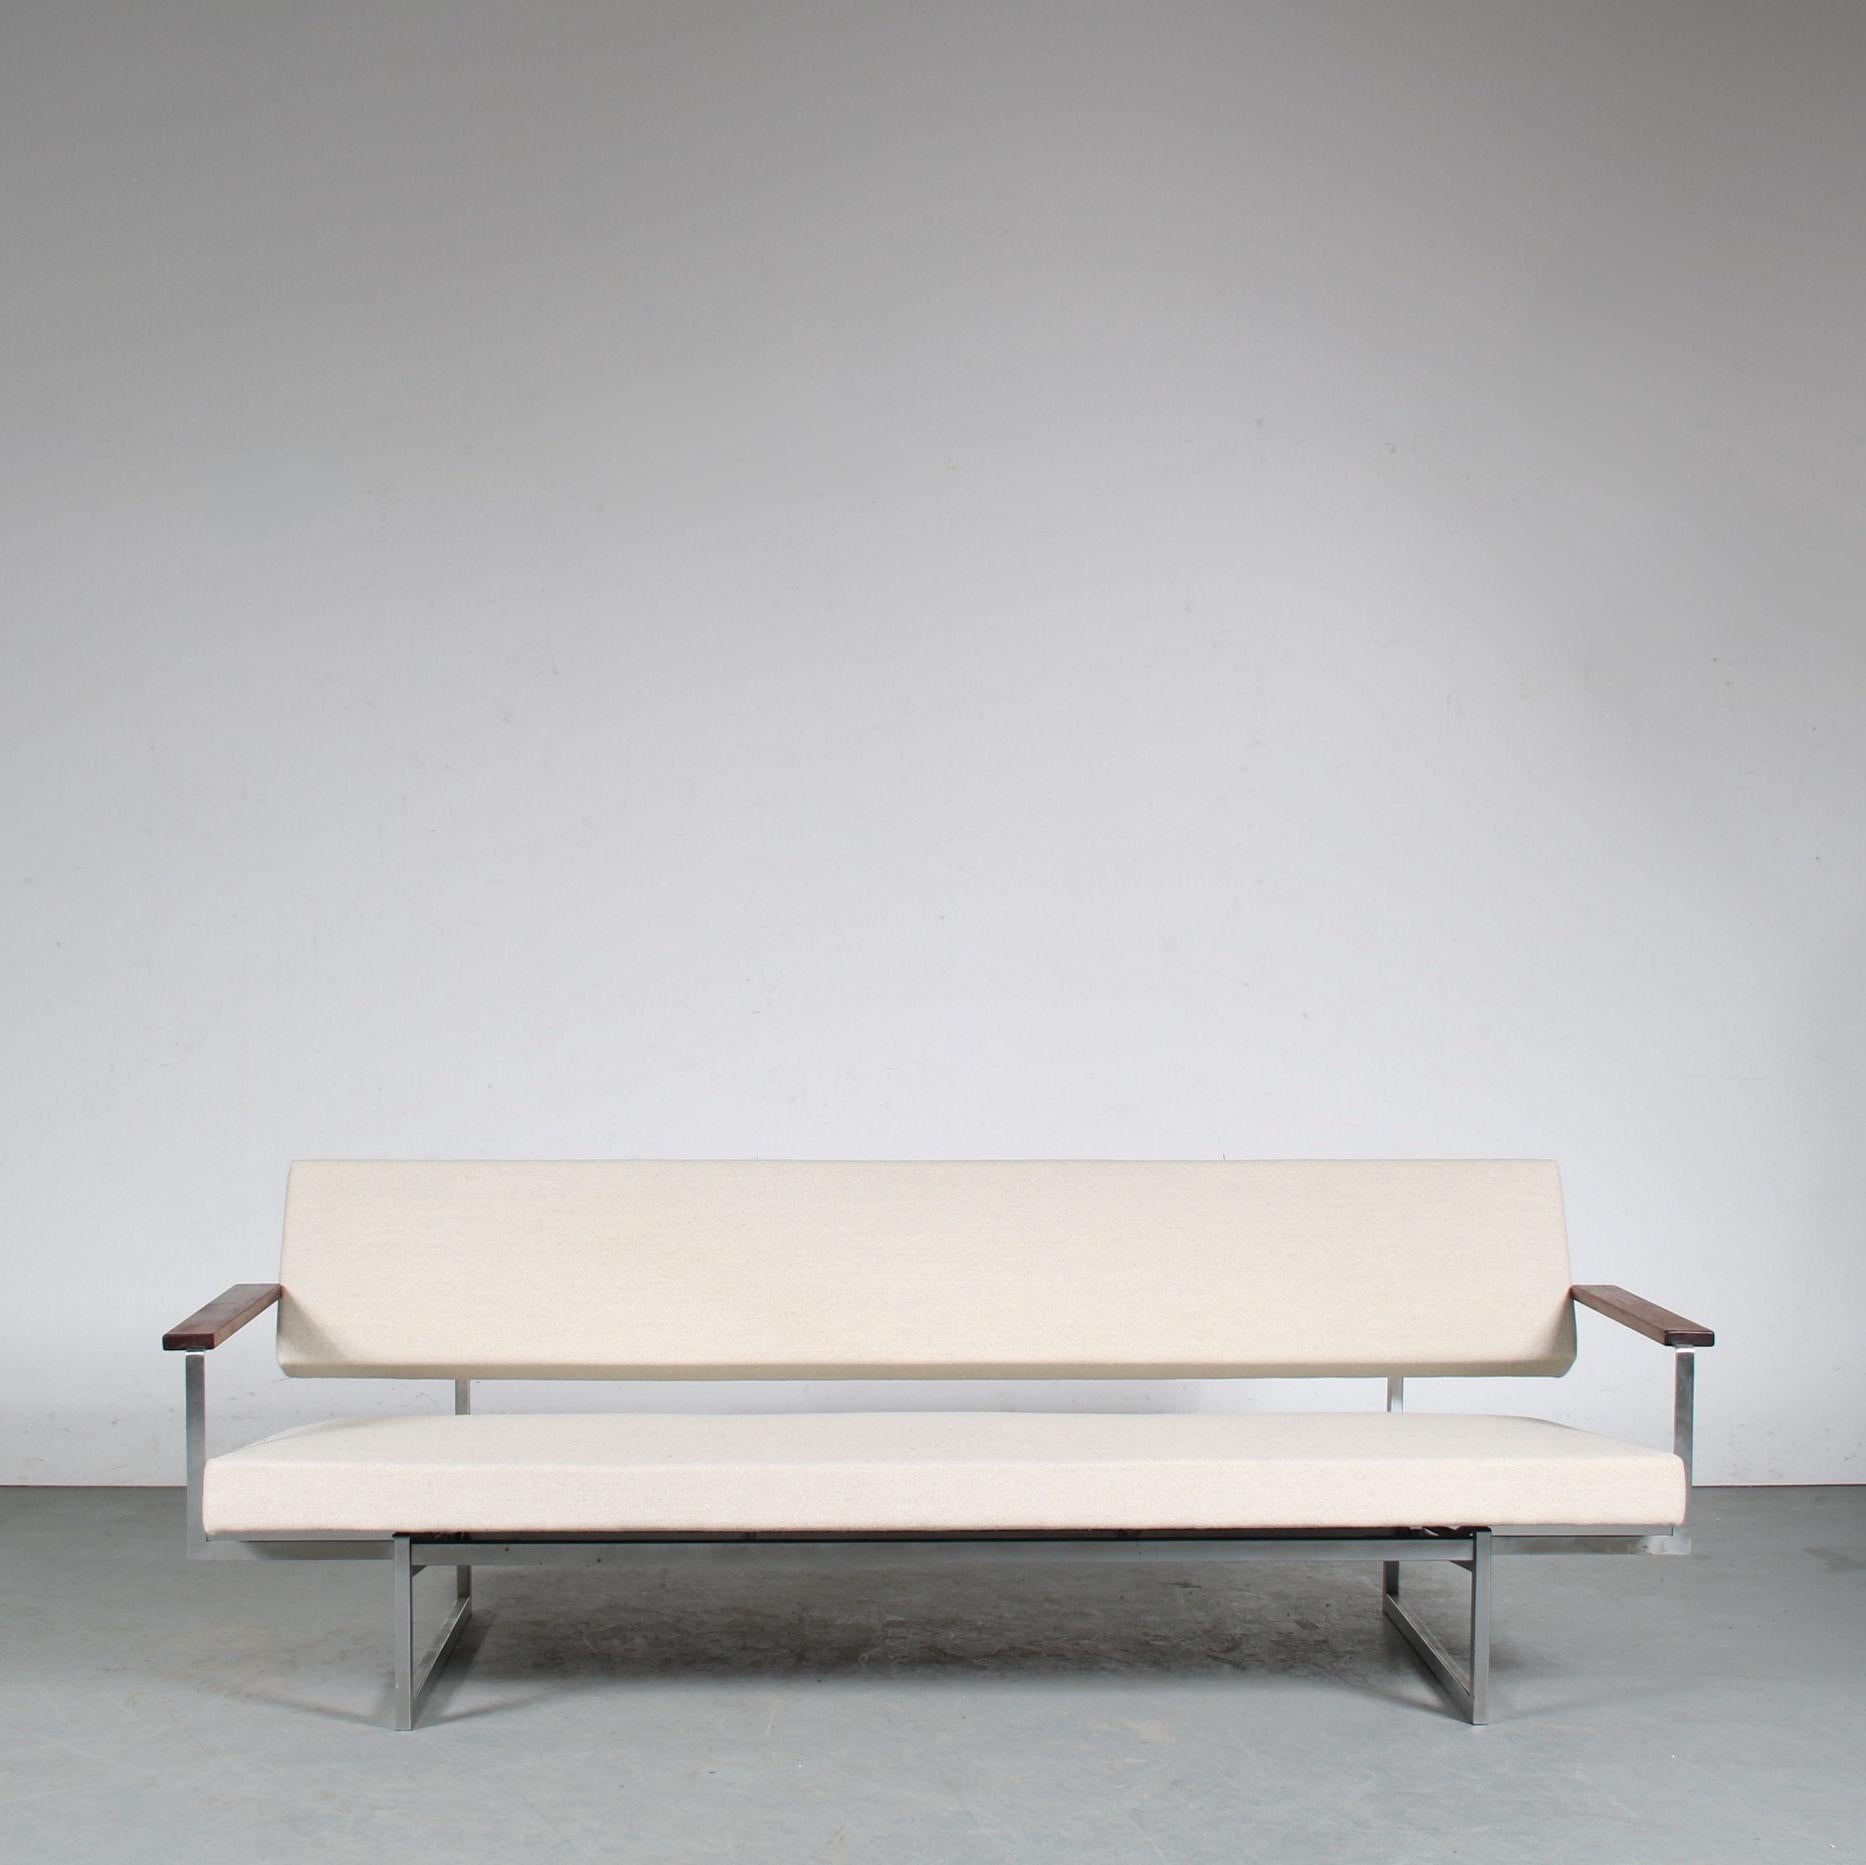 Metal “Lotus” Sleeping Sofa by Rob Parry for Gelderland, the Netherlands 1960